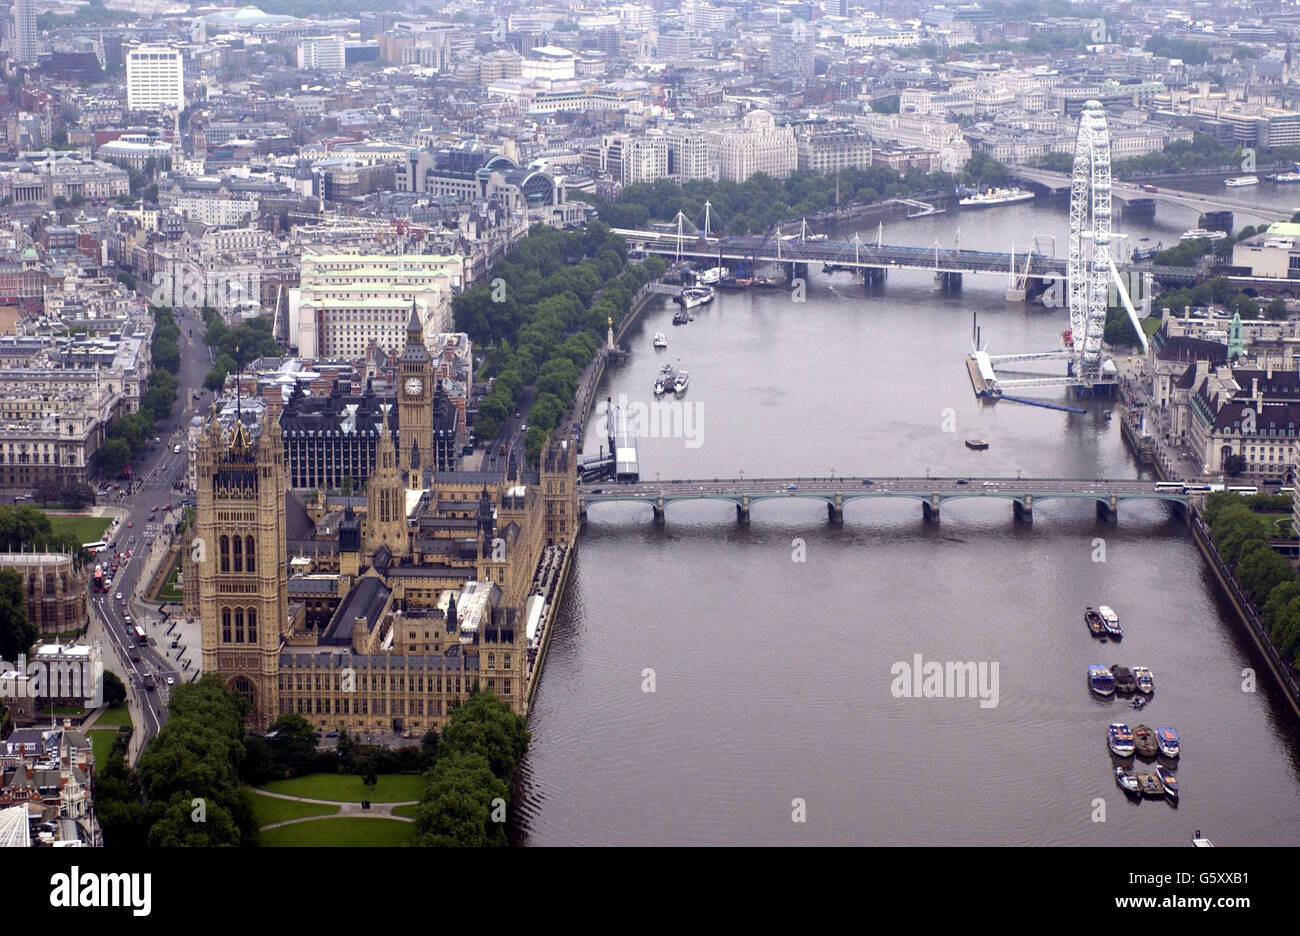 JANUARY 6TH : On this day in 1928 the River Thames burst it's banks drowning 14 people and making hundreds homeless. An aerial view of The Houses of Parliament, The River Thames, and the London Eye. Stock Photo